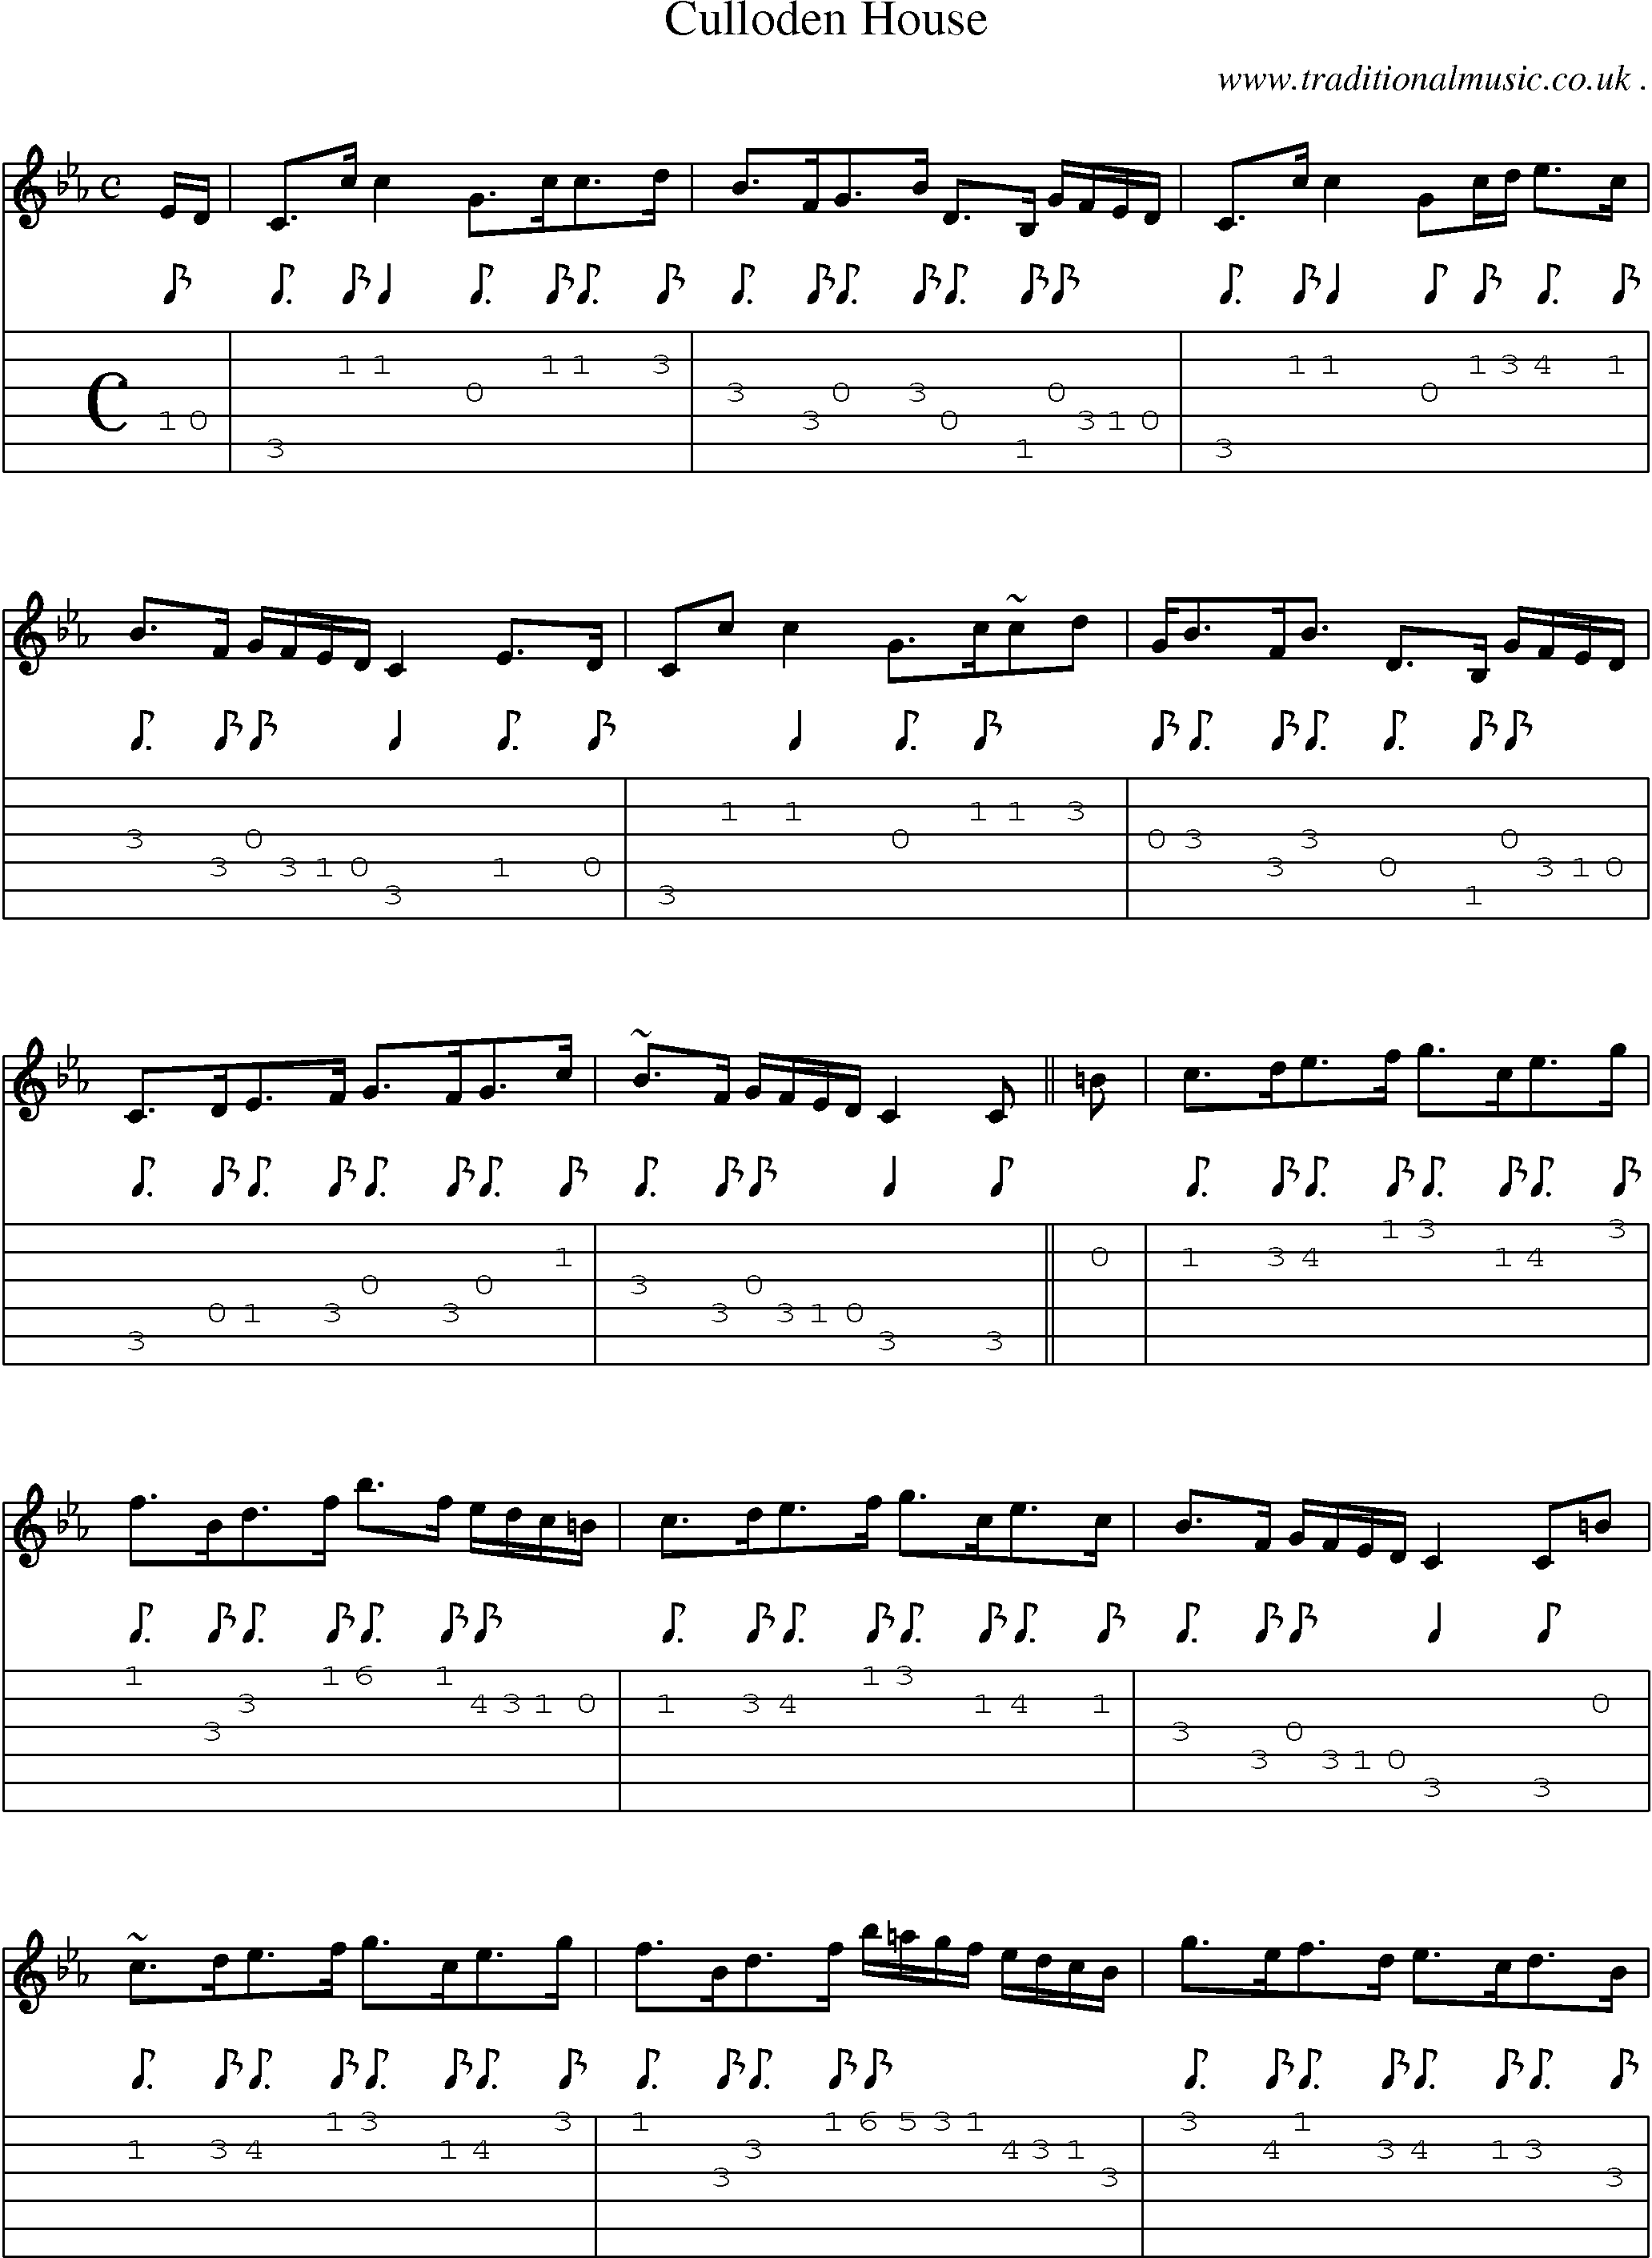 Sheet-music  score, Chords and Guitar Tabs for Culloden House